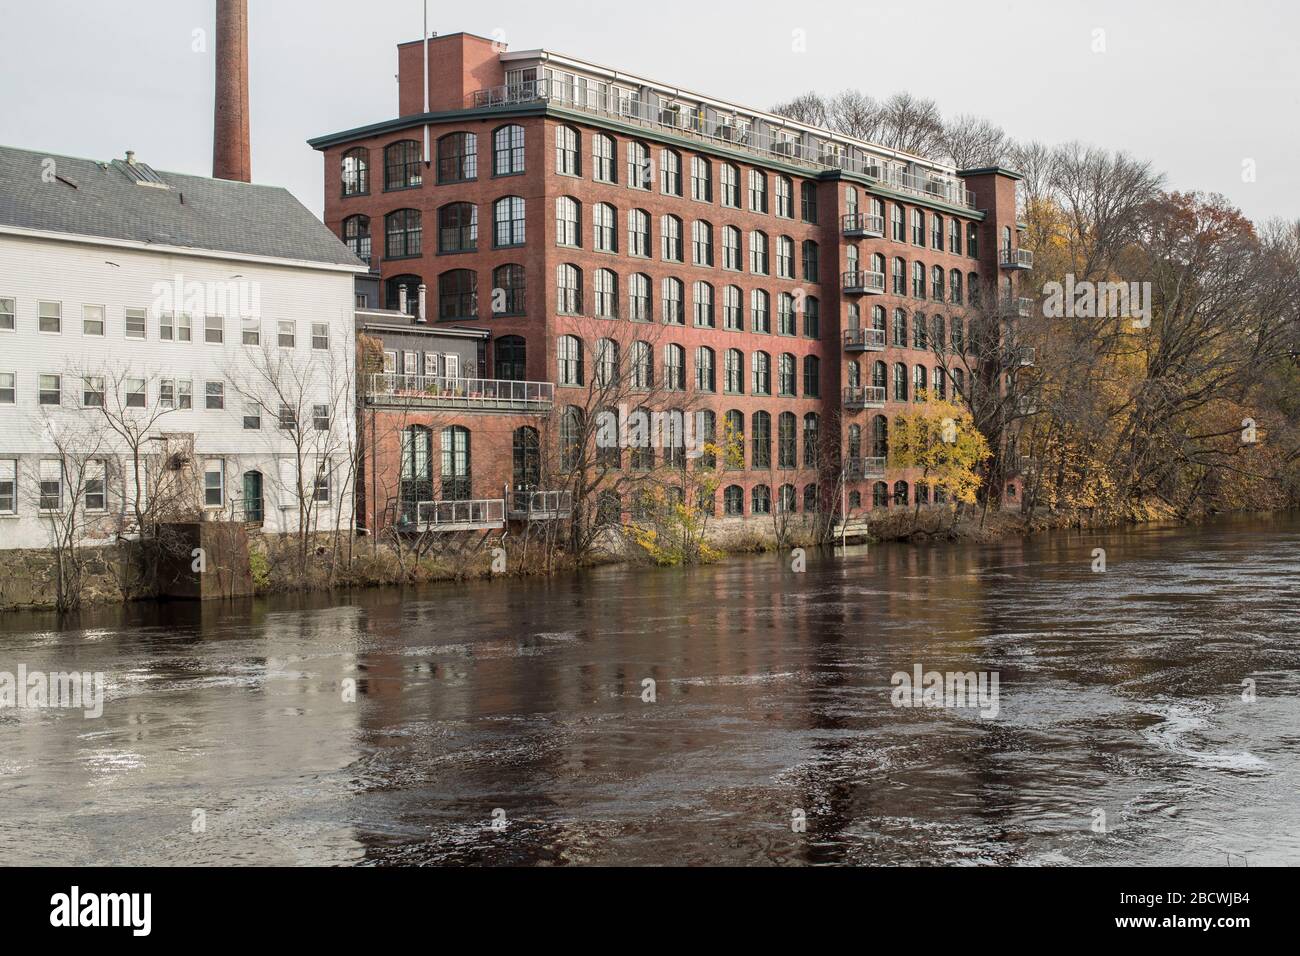 Old Mills and buildings , Blackstone River, Pawtucket, RI. Just behind Police Station on the Blackstone River Canal Historical Trail or region. Stock Photo